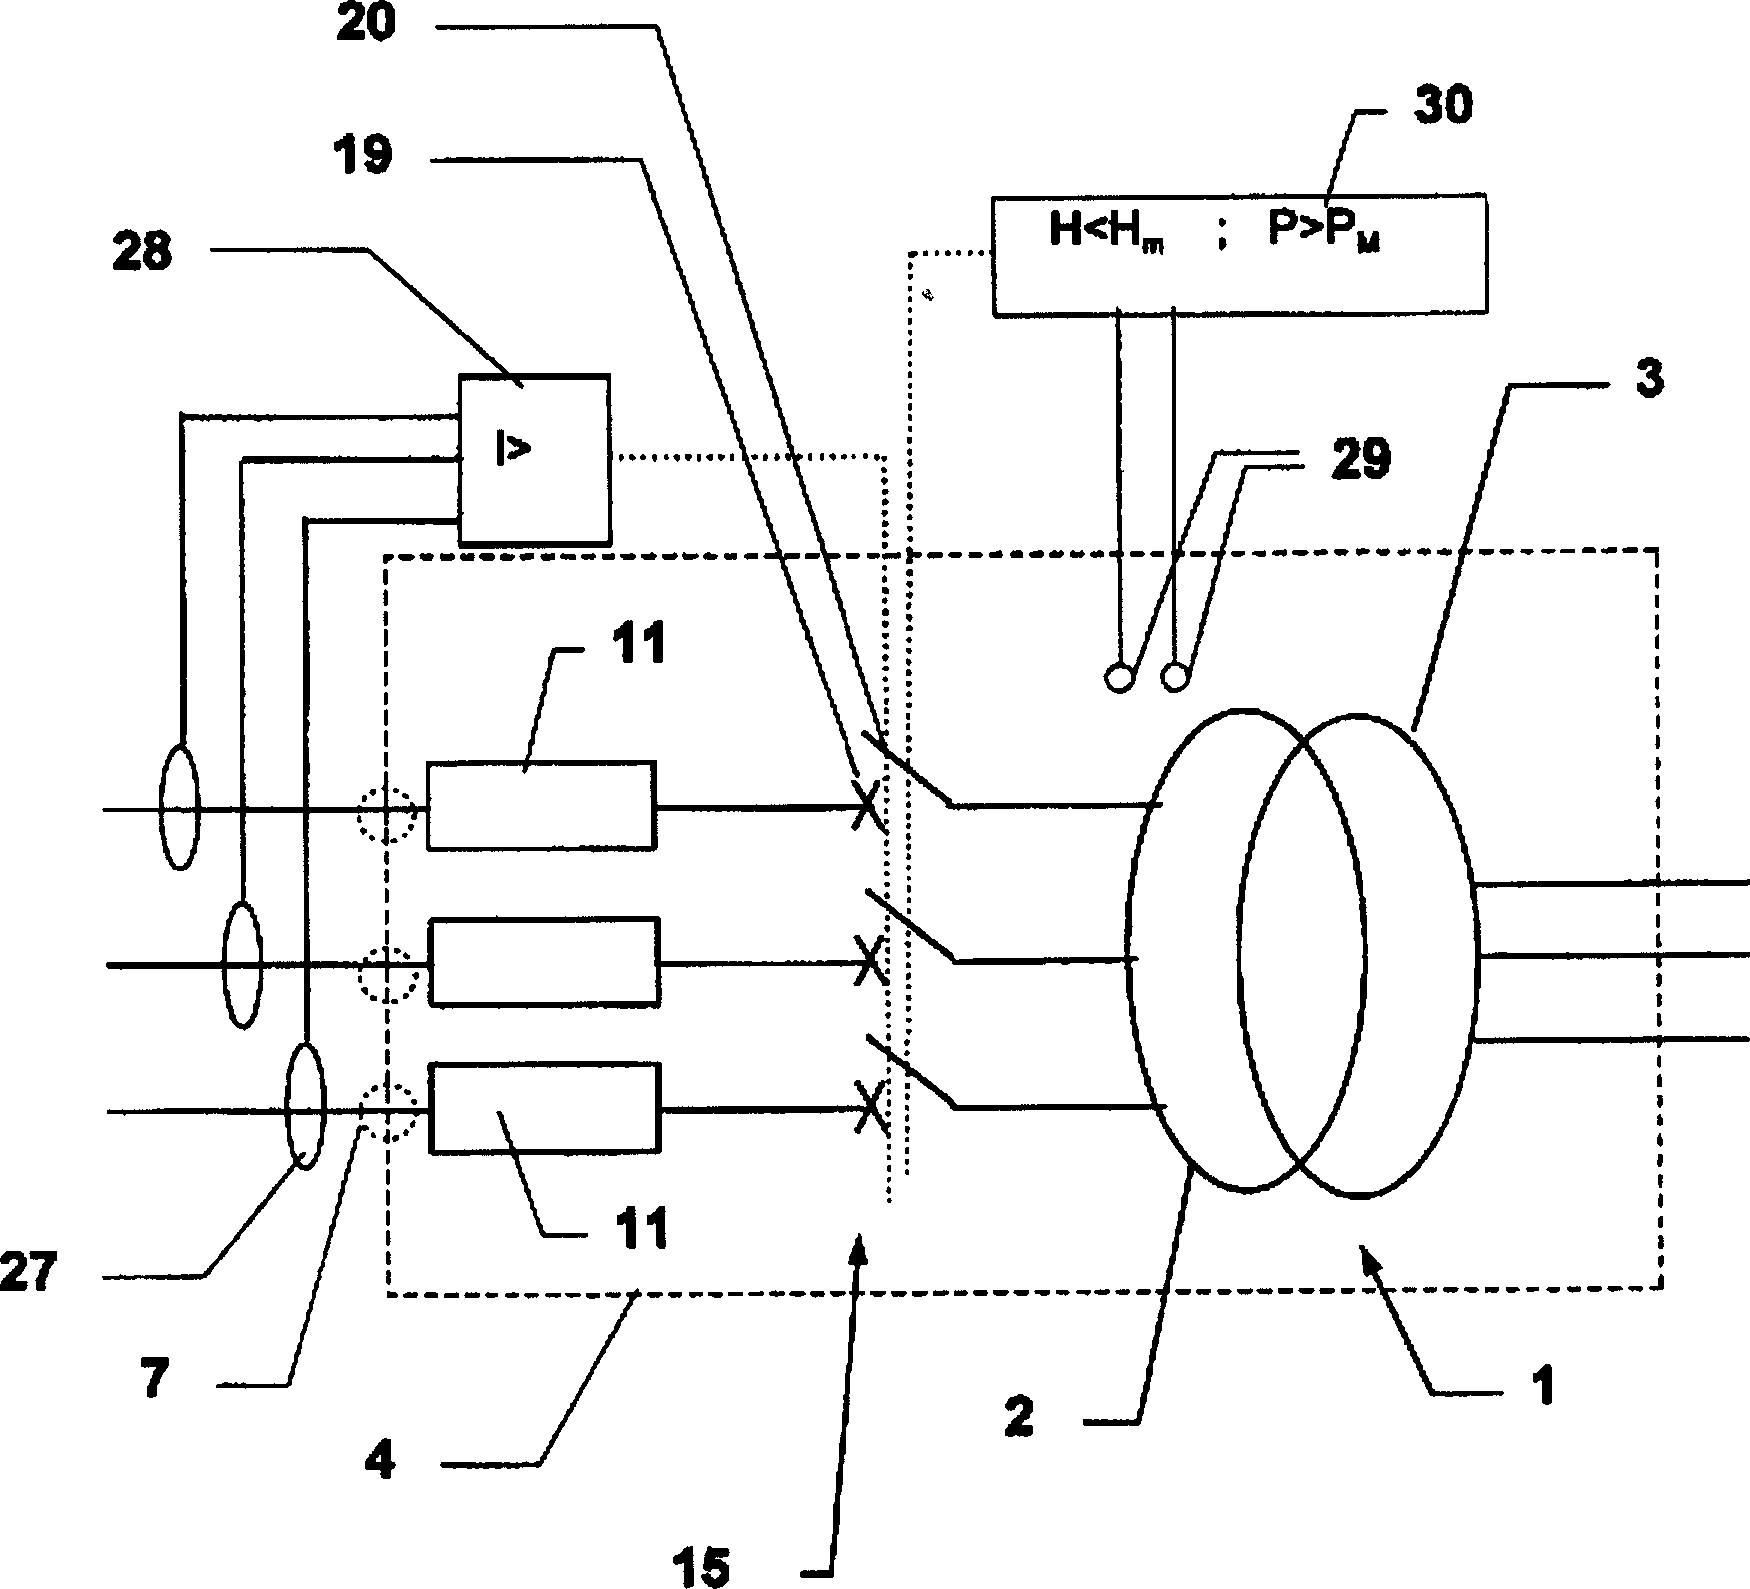 Submersible transformer using device with circuit braker and fuse for self-protecting